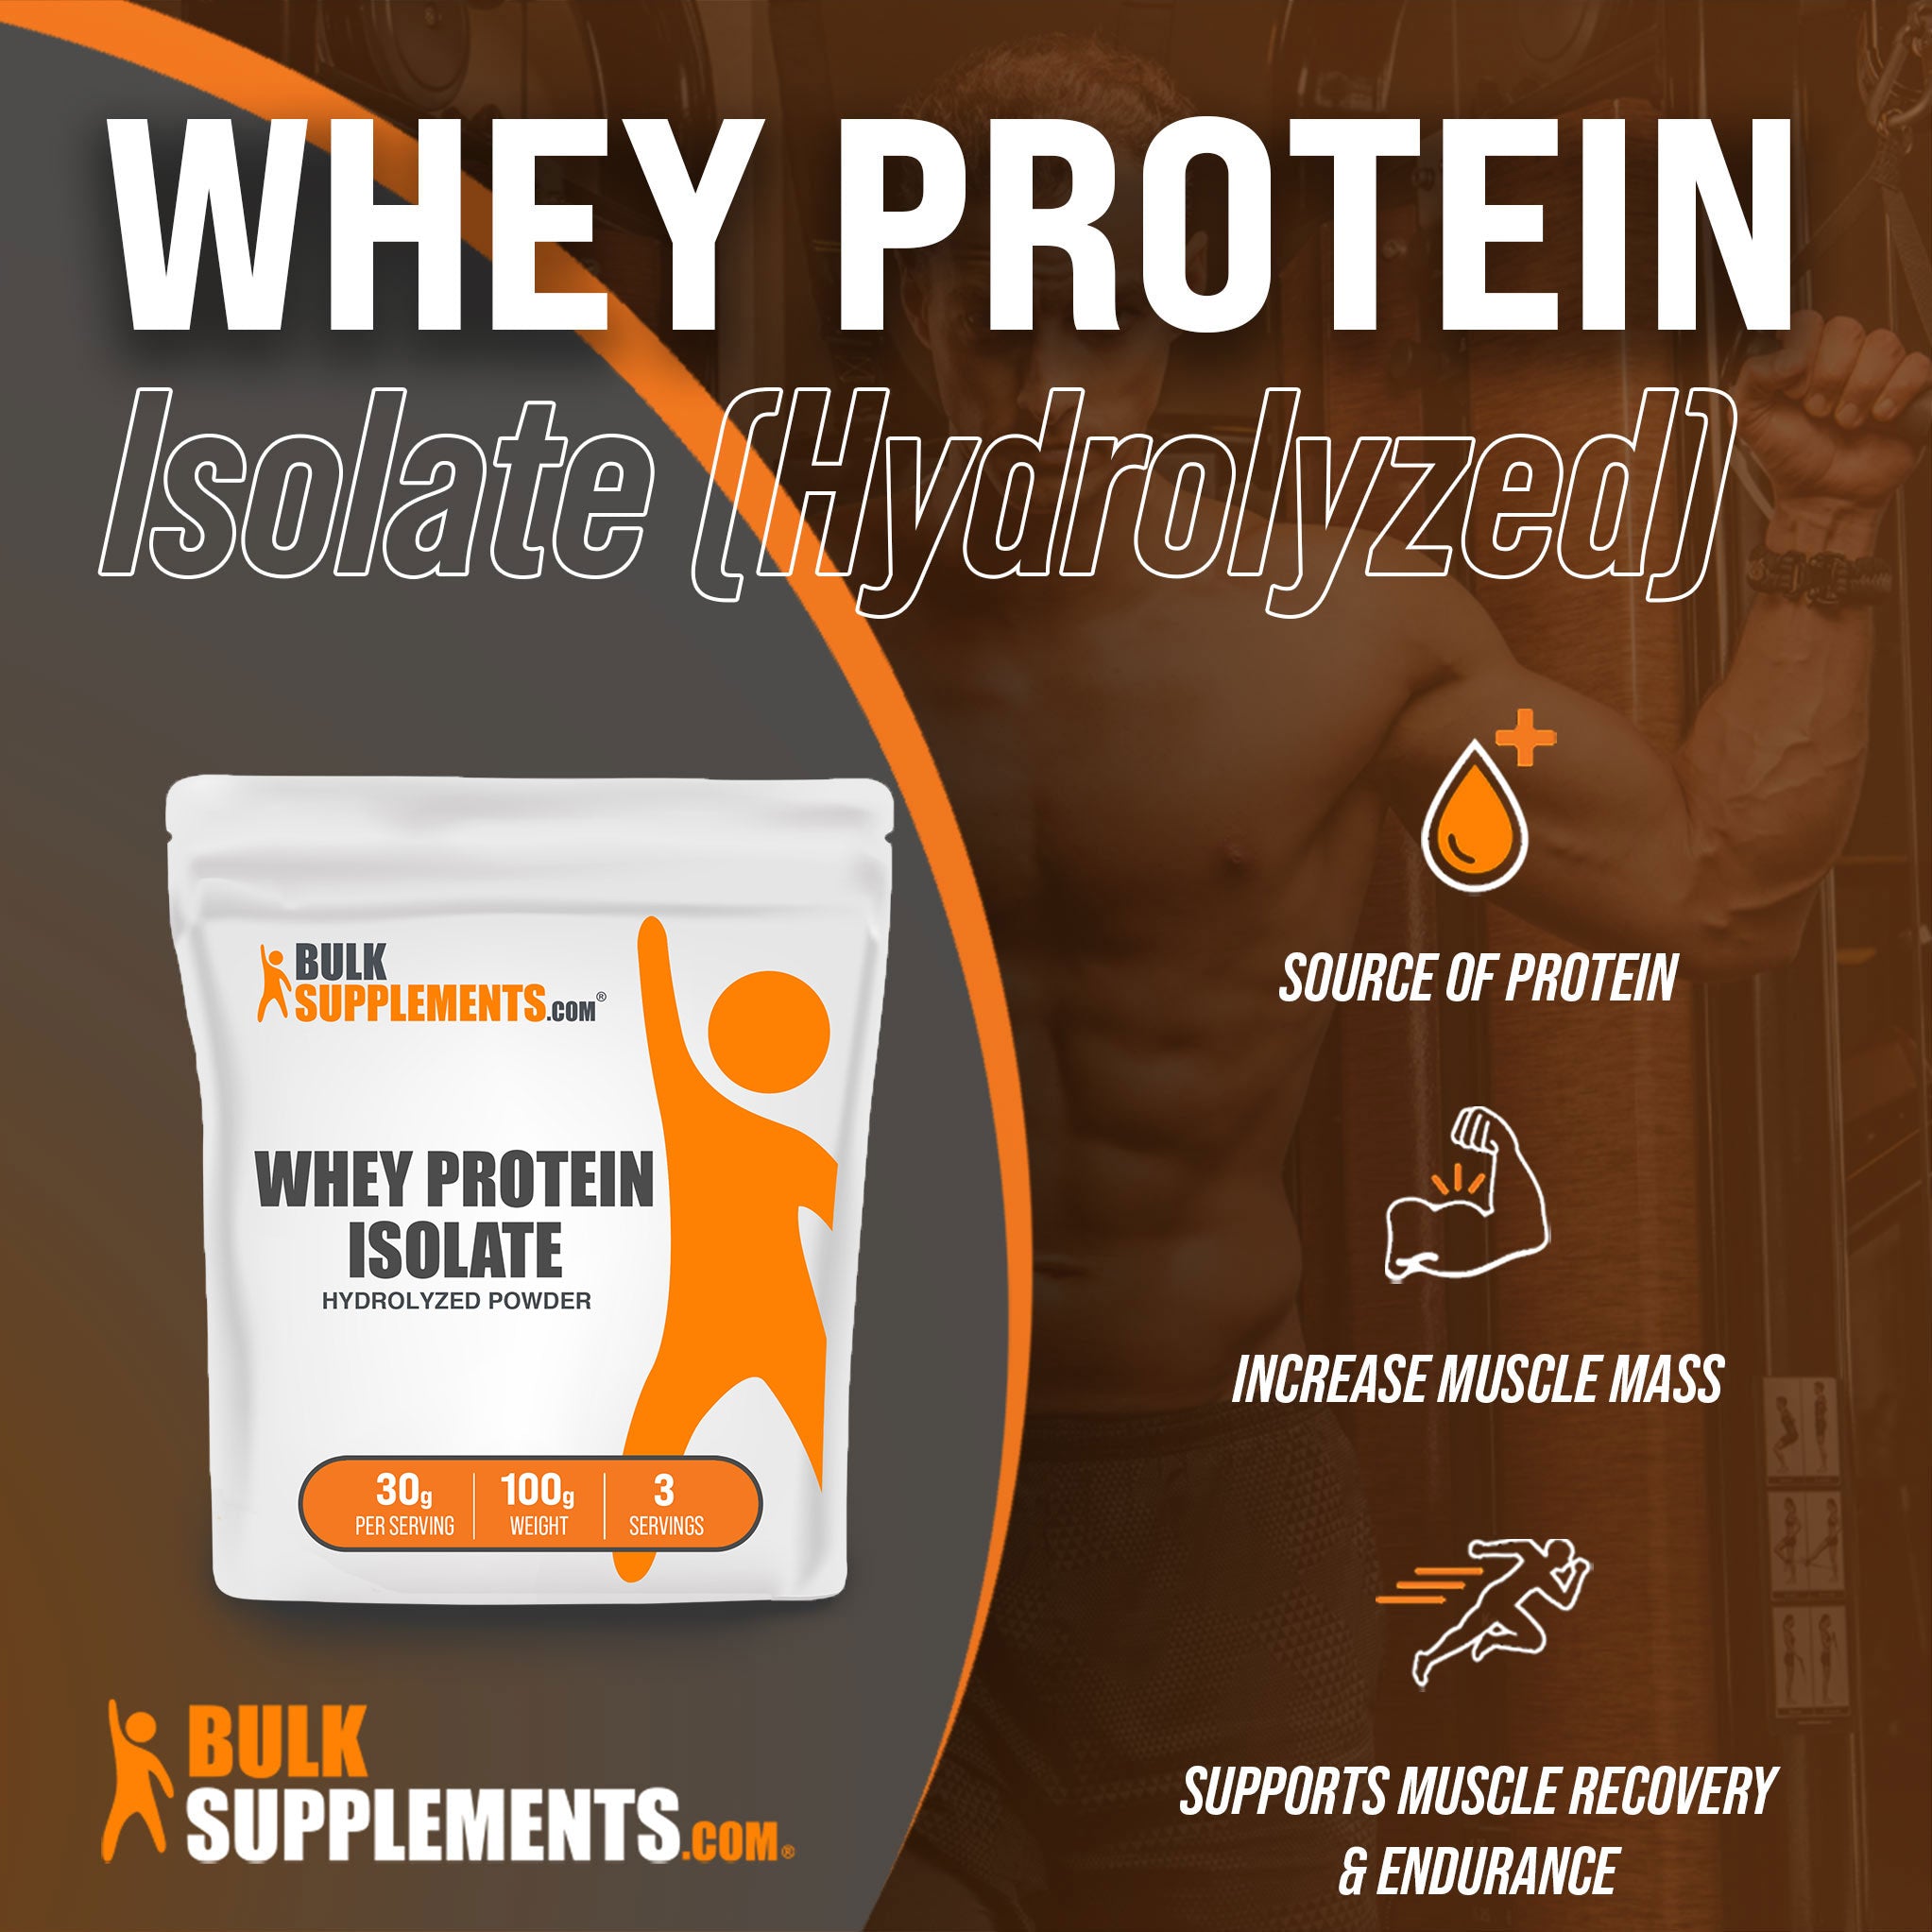 Benefits of Whey Protein Isolate Hydrolyzed; source of protein, increase muscle mass, supports muscle recovery and endurance